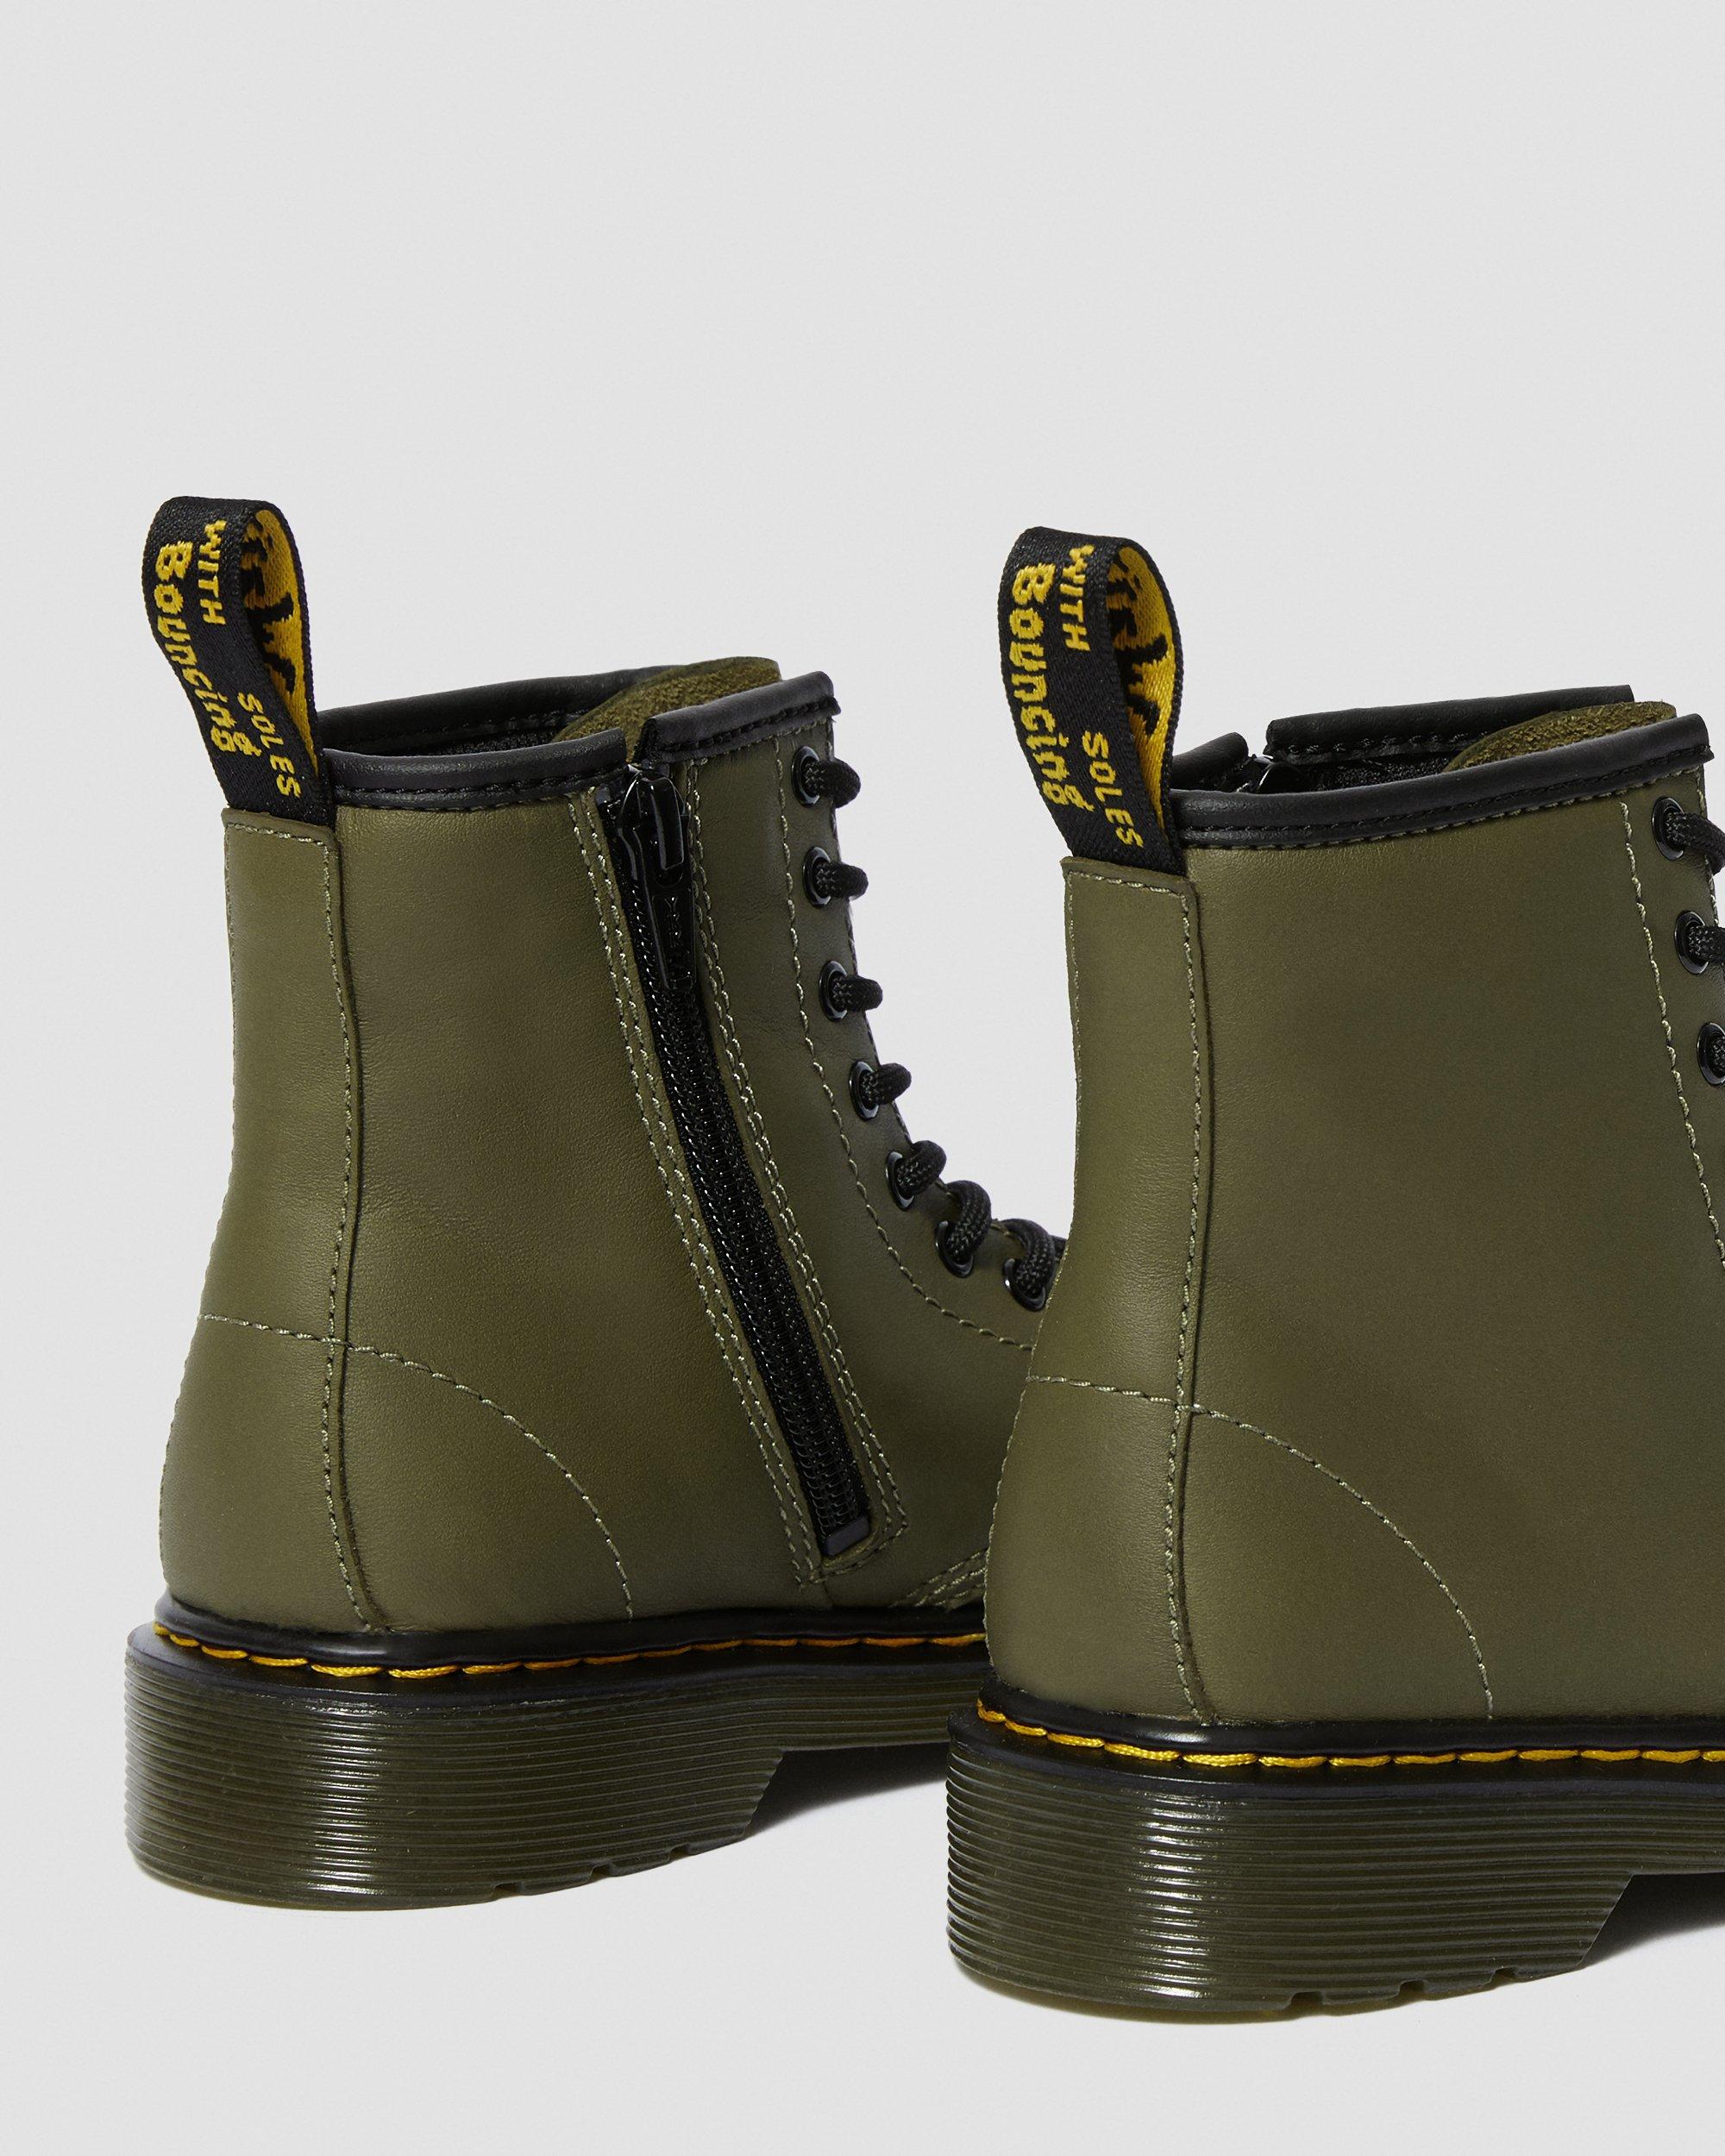 Junior 1460 Leather Lace Up Boots in Olive | Dr. Martens